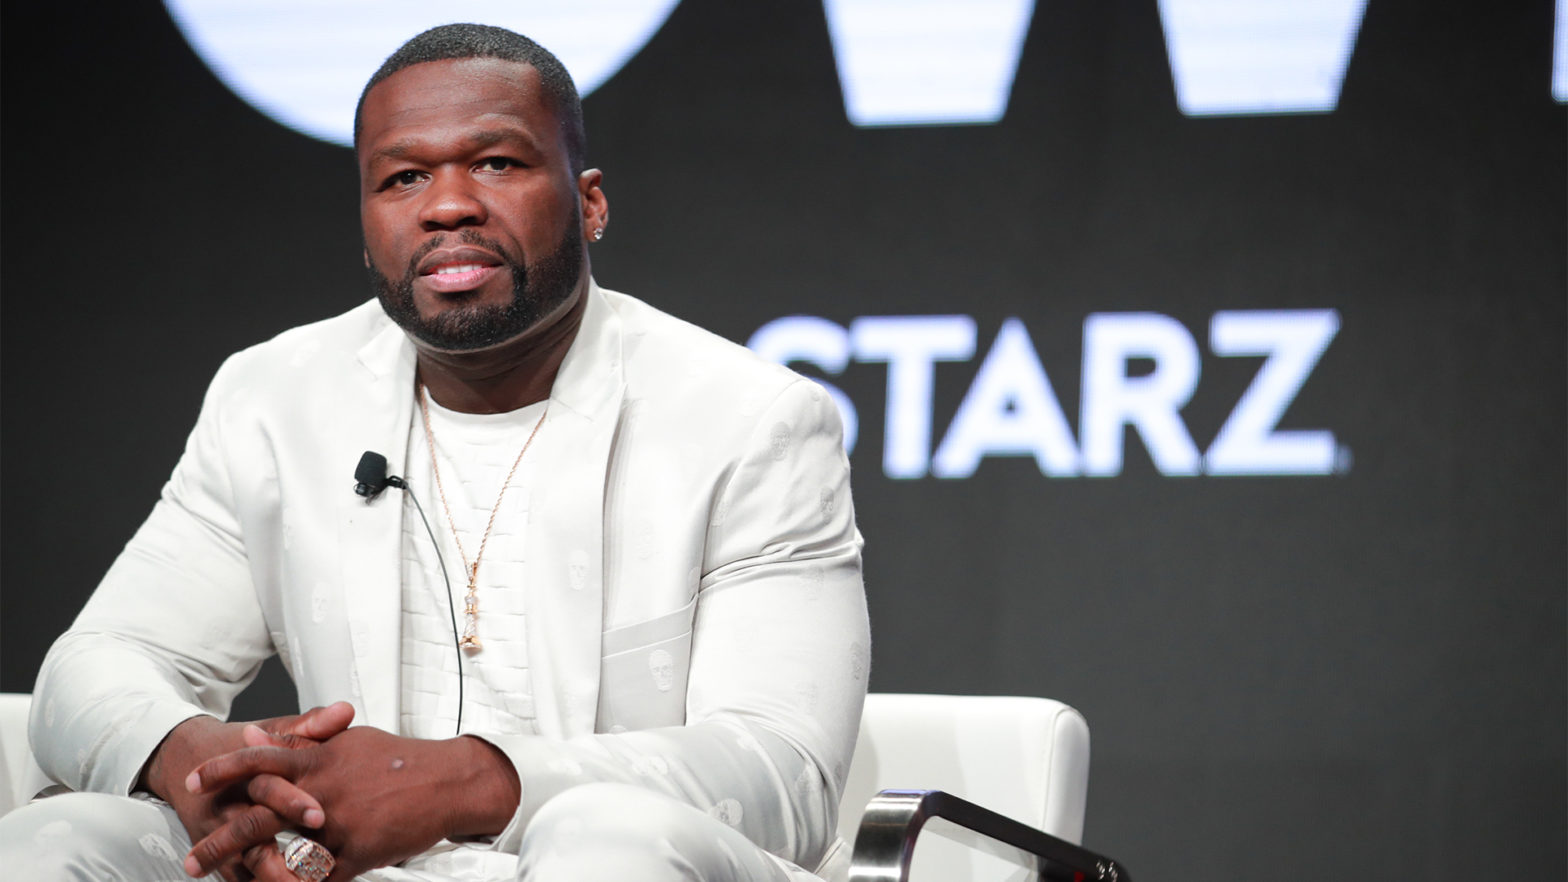 50 Cent's G-Unity Business Lab Proves To Be A Success, '66 Of My 75 Kids Have A Job Now'